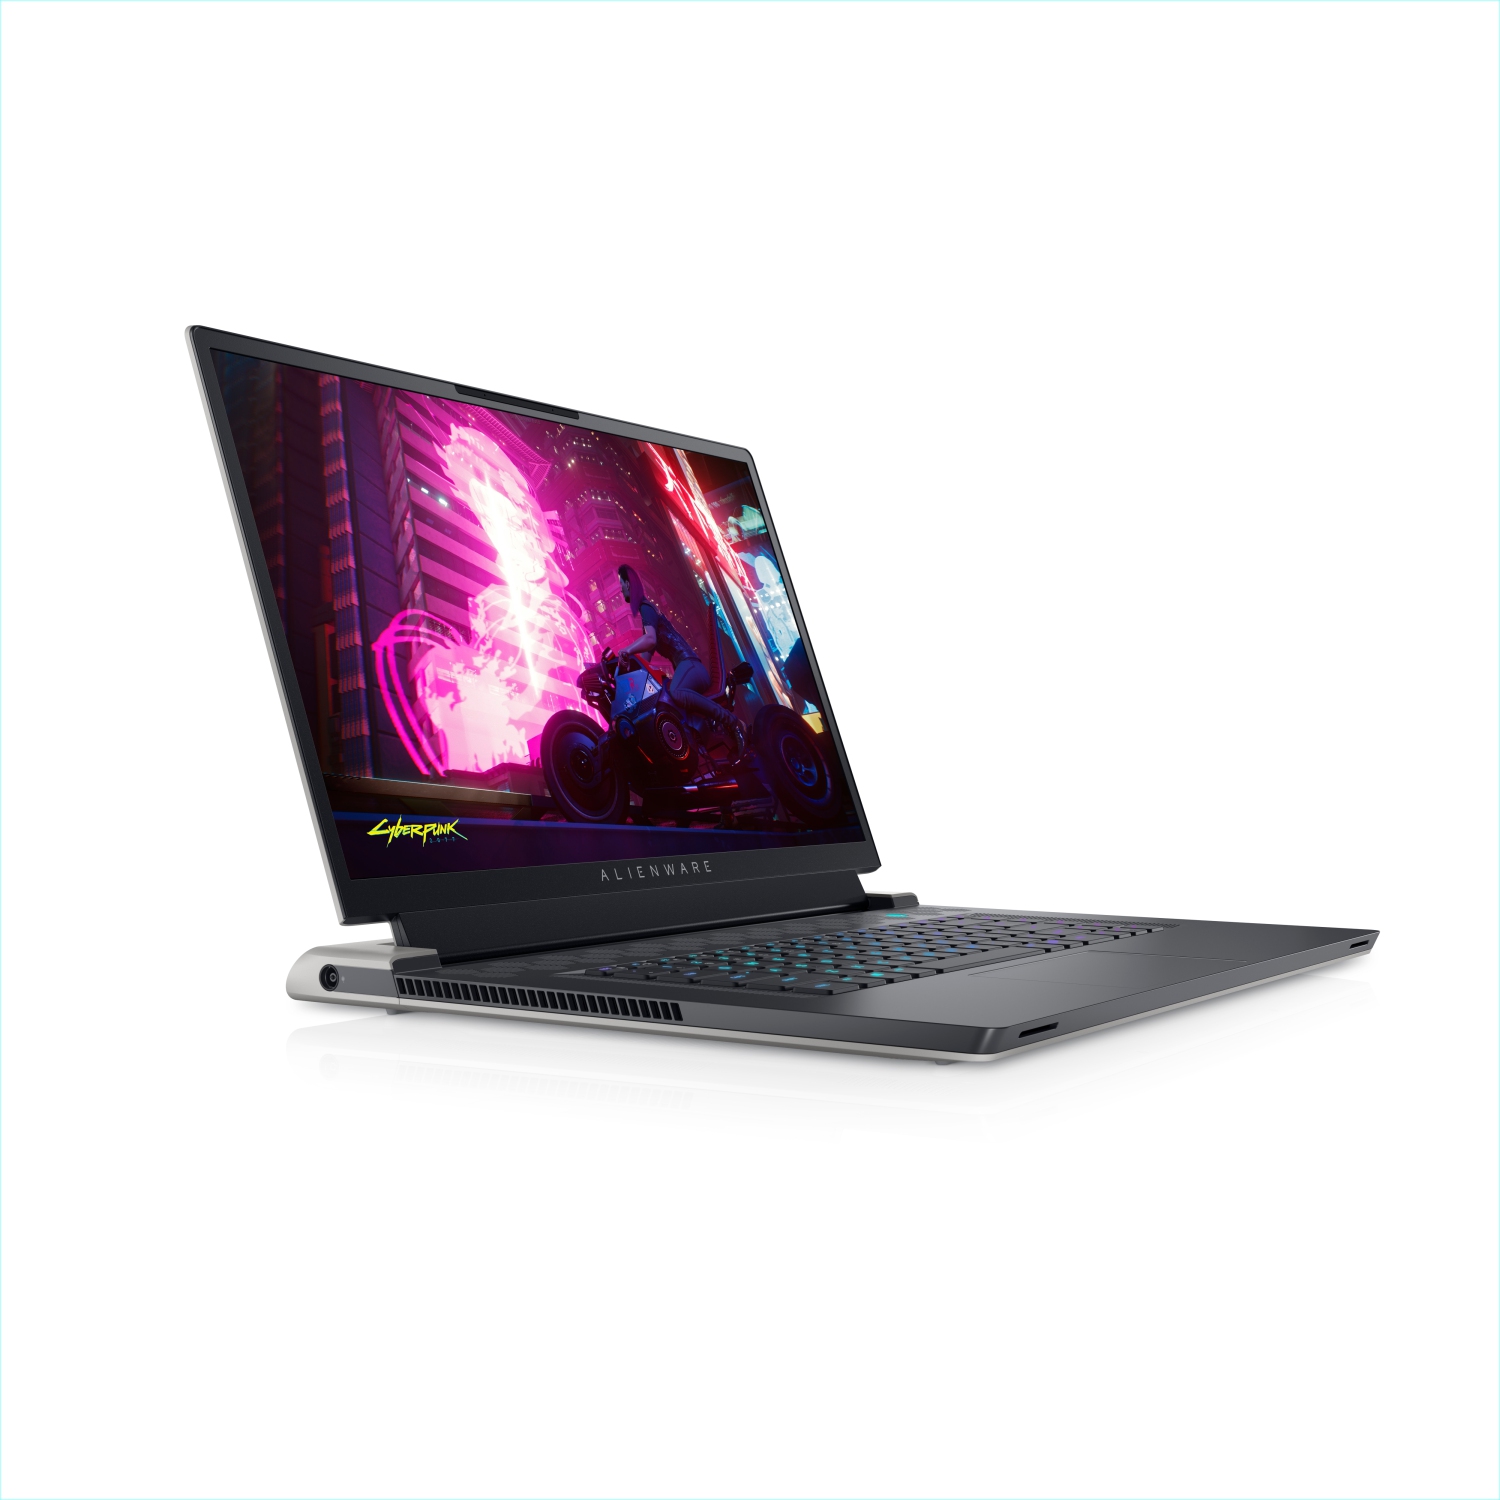 Refurbished (Excellent) - Dell Alienware X17 R1 Gaming Laptop (2021), 17.3" FHD, Core i7, 1TB SSD, 32GB RAM, RTX 3060, 8 Cores @ 4.6 GHz, 11th Gen CPU Certified